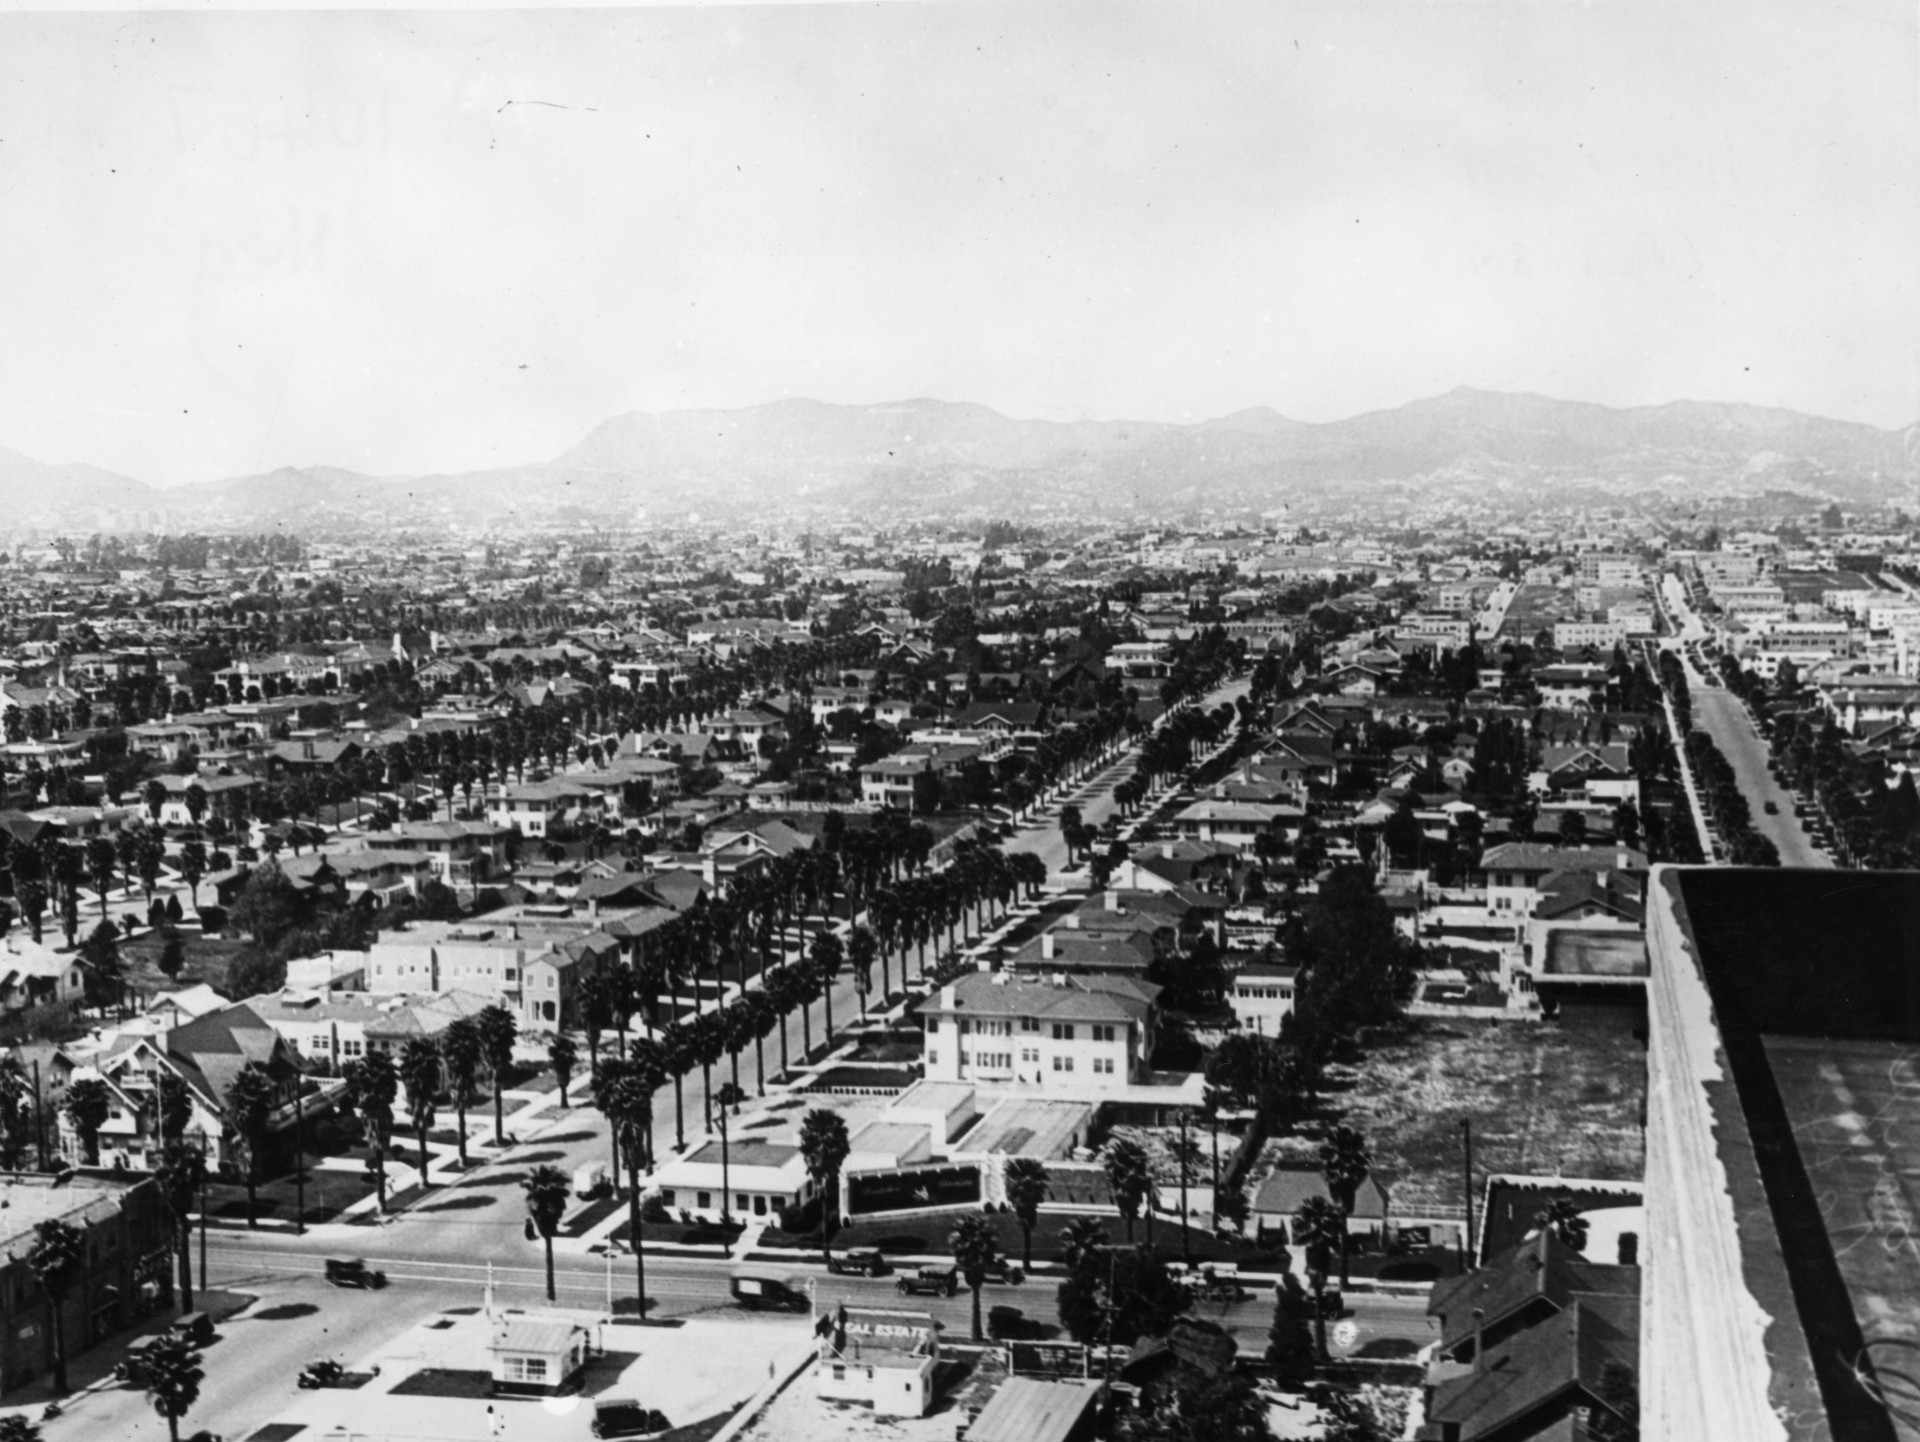 This is a view of Hollywood, Los Angeles, in 1925.<p><a href="https://www.msn.com/en-us/community/channel/vid-7xx8mnucu55yw63we9va2gwr7uihbxwc68fxqp25x6tg4ftibpra?cvid=94631541bc0f4f89bfd59158d696ad7e">Follow us and access great exclusive content every day</a></p>